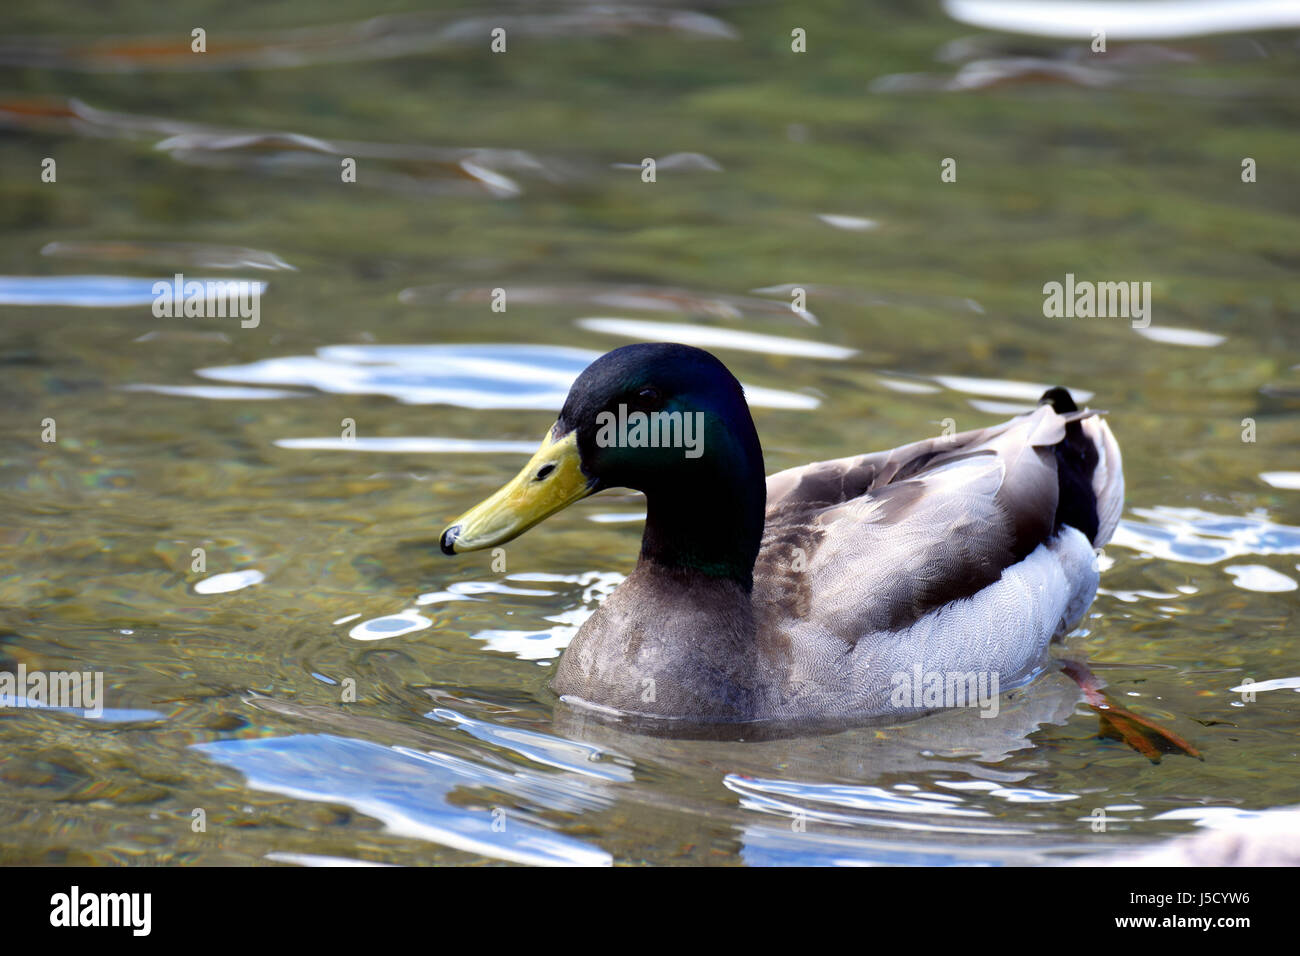 Homme canard colvert (Anas platyrhynchos) natation Banque D'Images